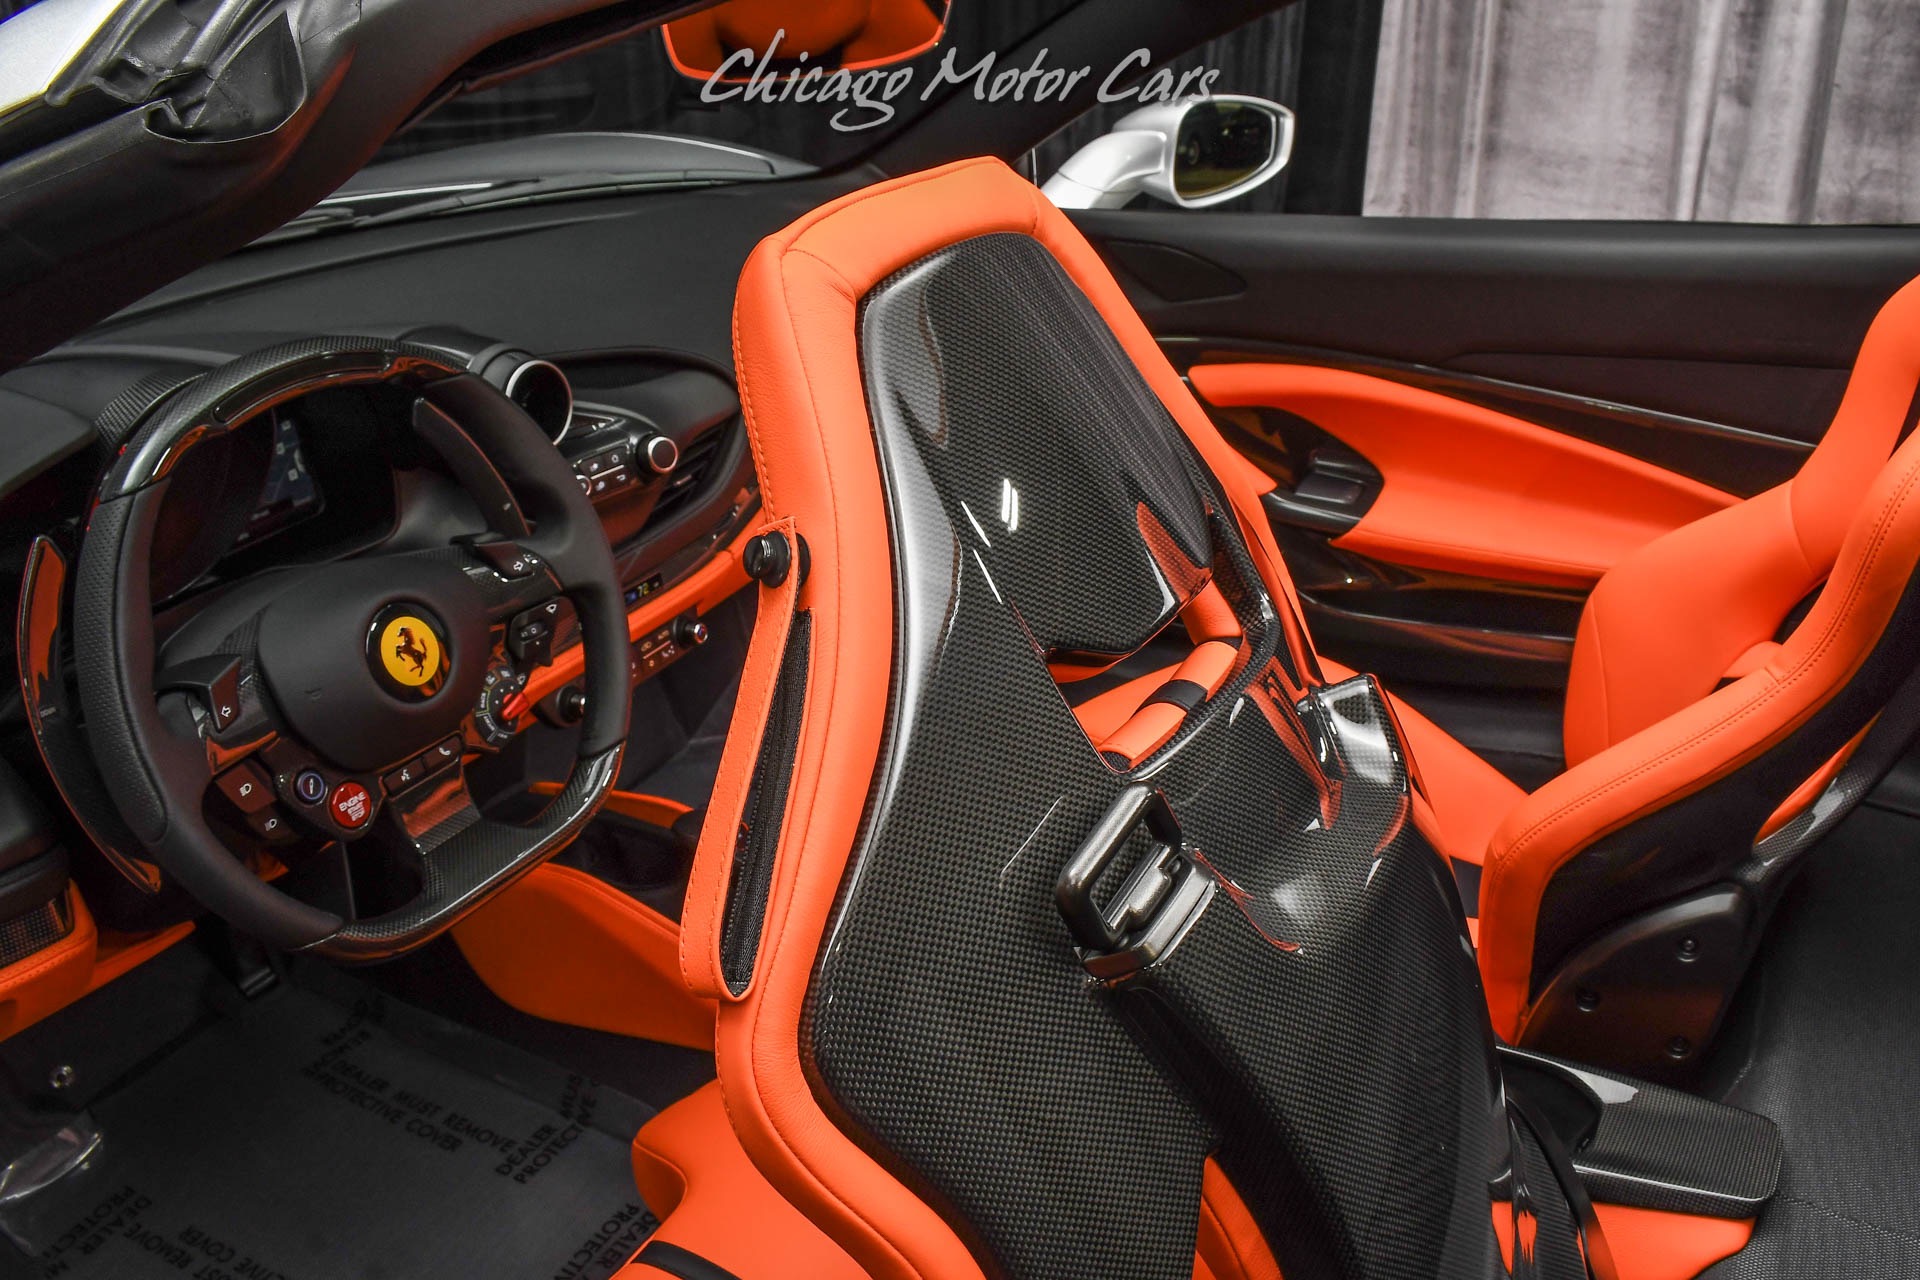 Used-2022-Ferrari-F8-Spider-Tailor-Made-OVER-280K-in-Factory-Options-ONLY-300-Miles-Huge-MSRP